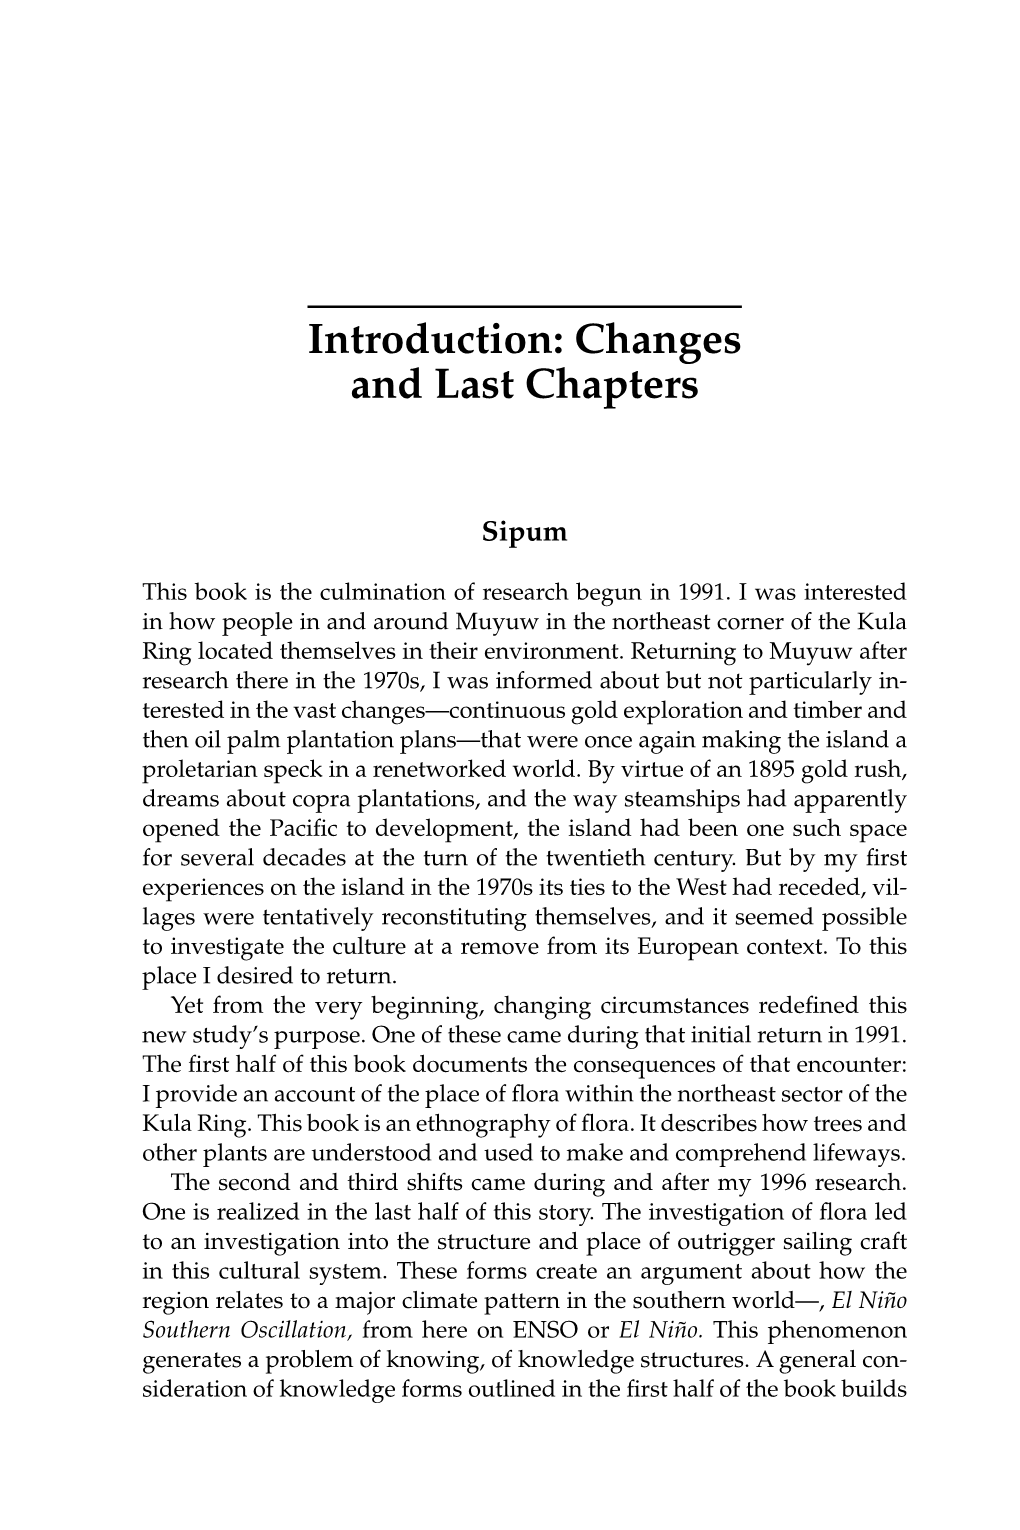 Introduction: Changes and Last Chapters